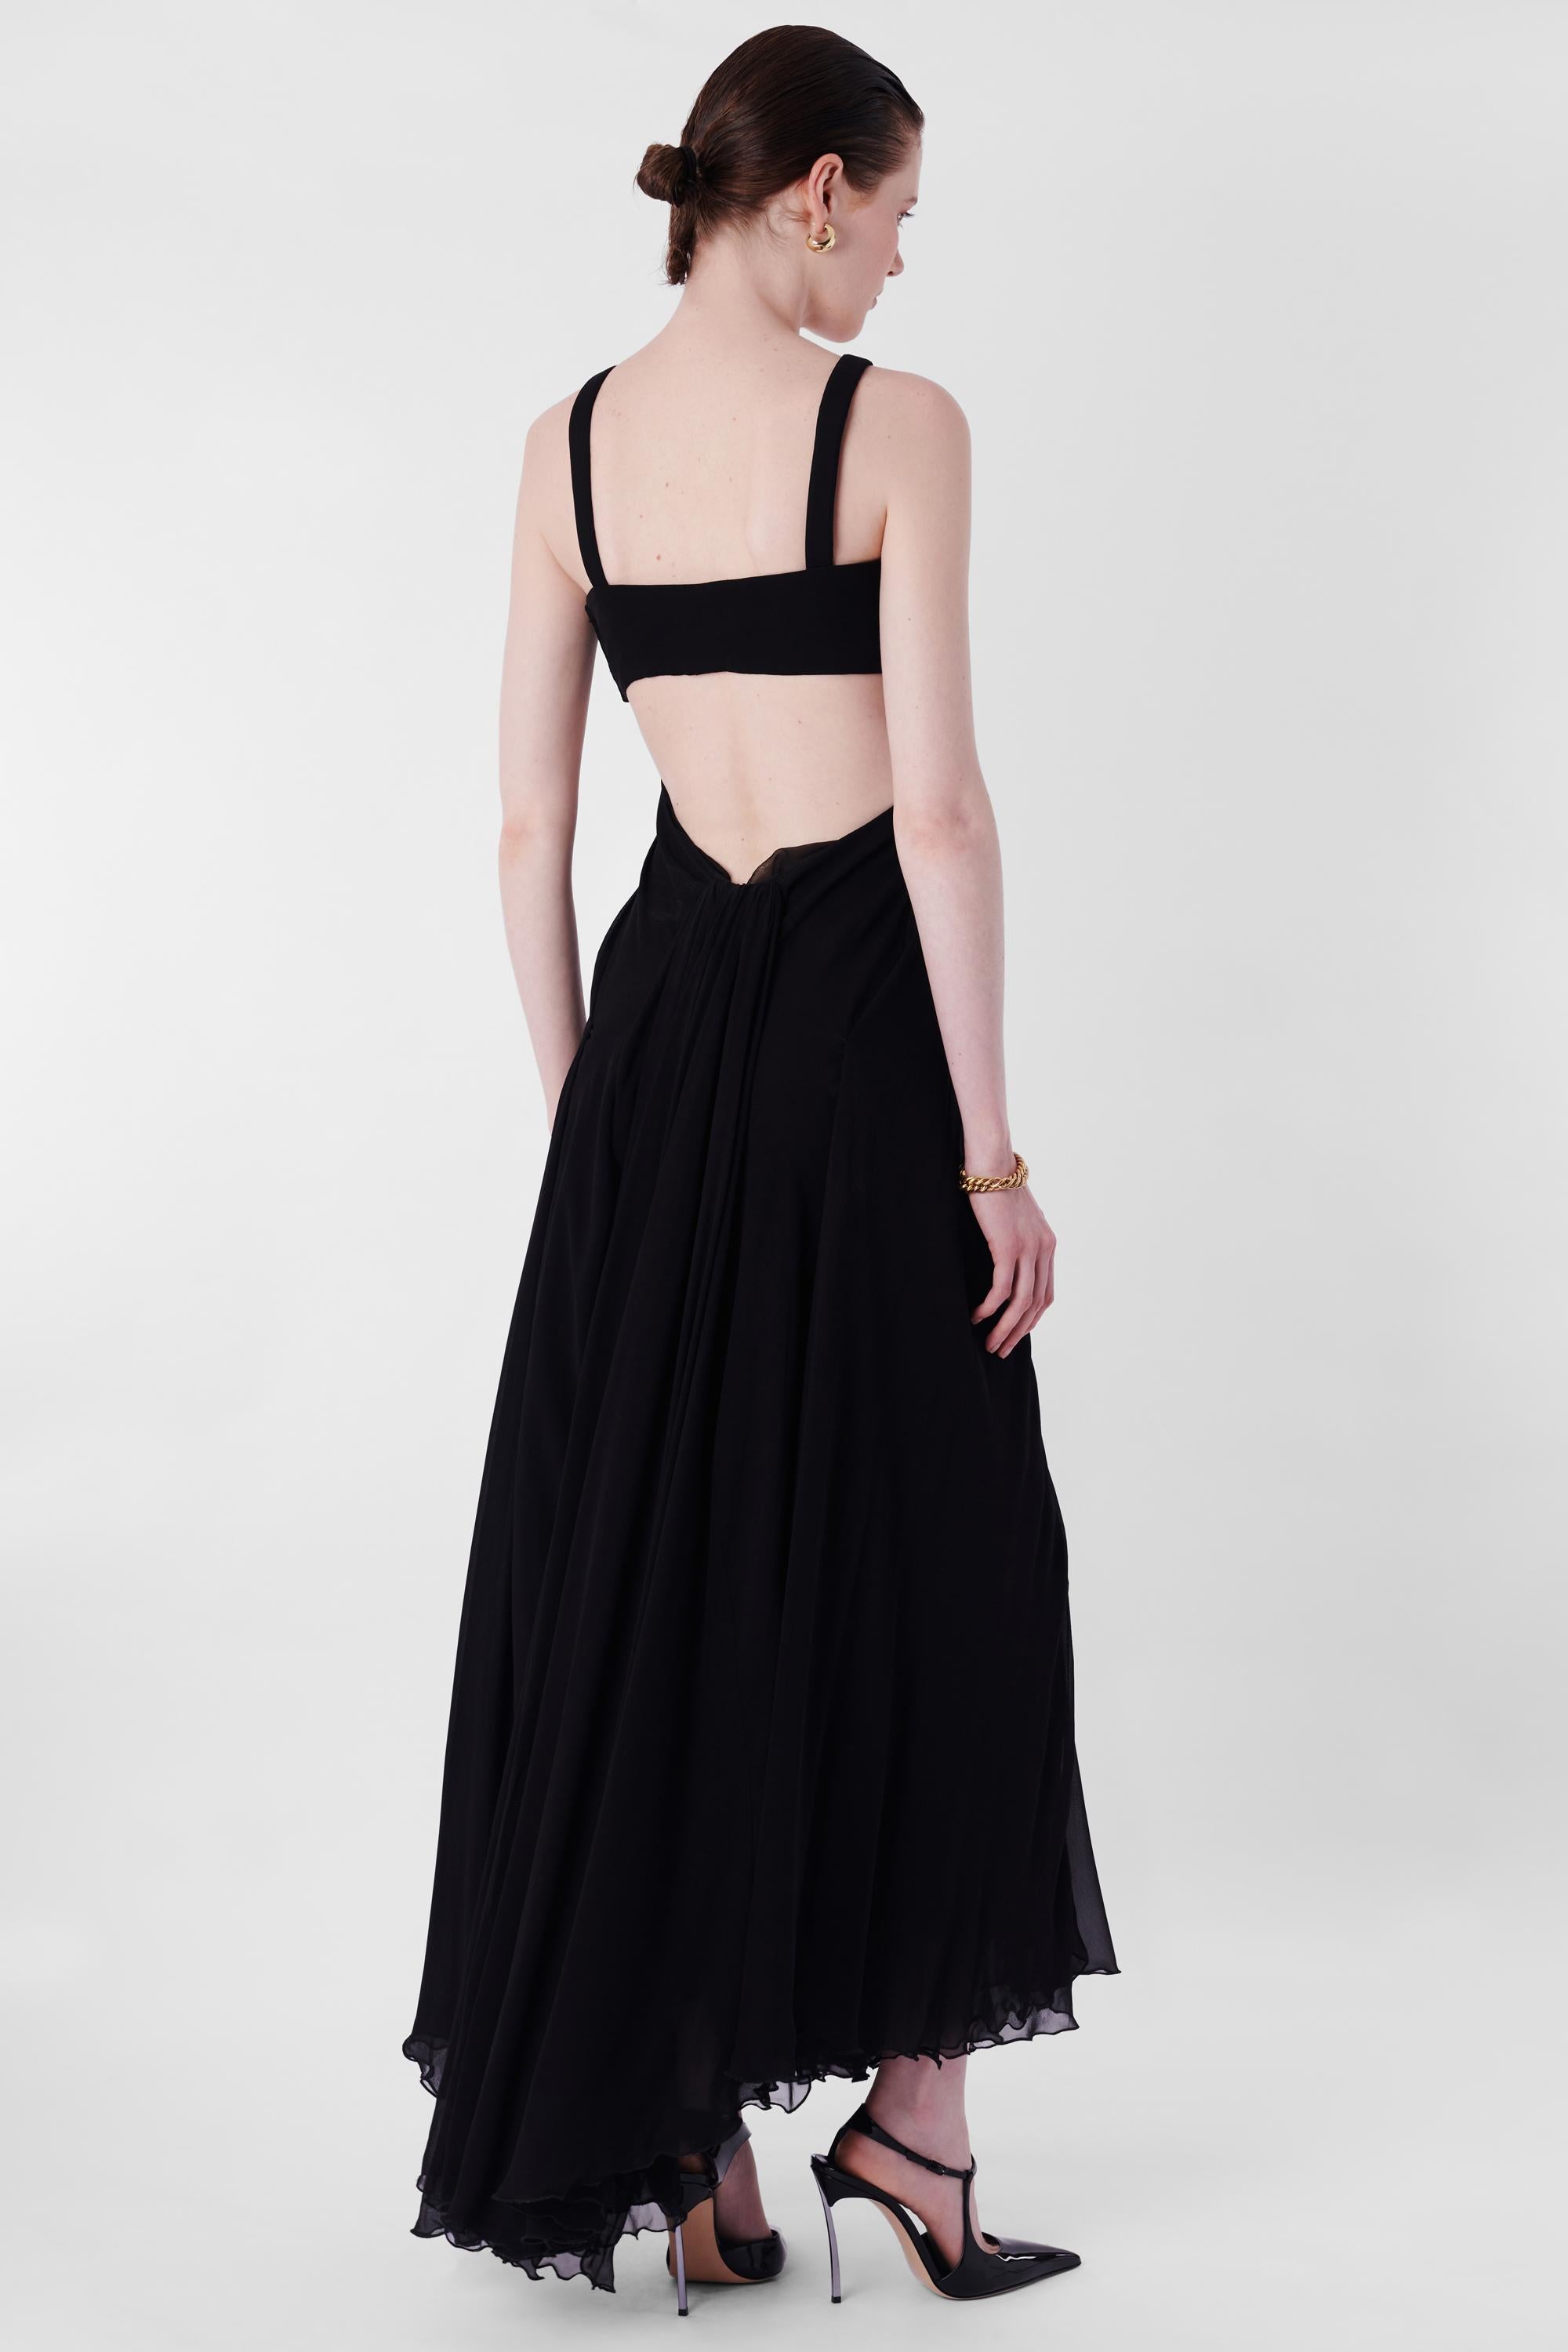 Nordic Poetry is excited to present this incredible Gucci 2008 Black Silk Cutout Maxi Dress. Features cross front straps, Side body hooks, twisted skirt detail and maxi length. In excellent vintage condition. Authenticity guaranteed.

Label size: 40